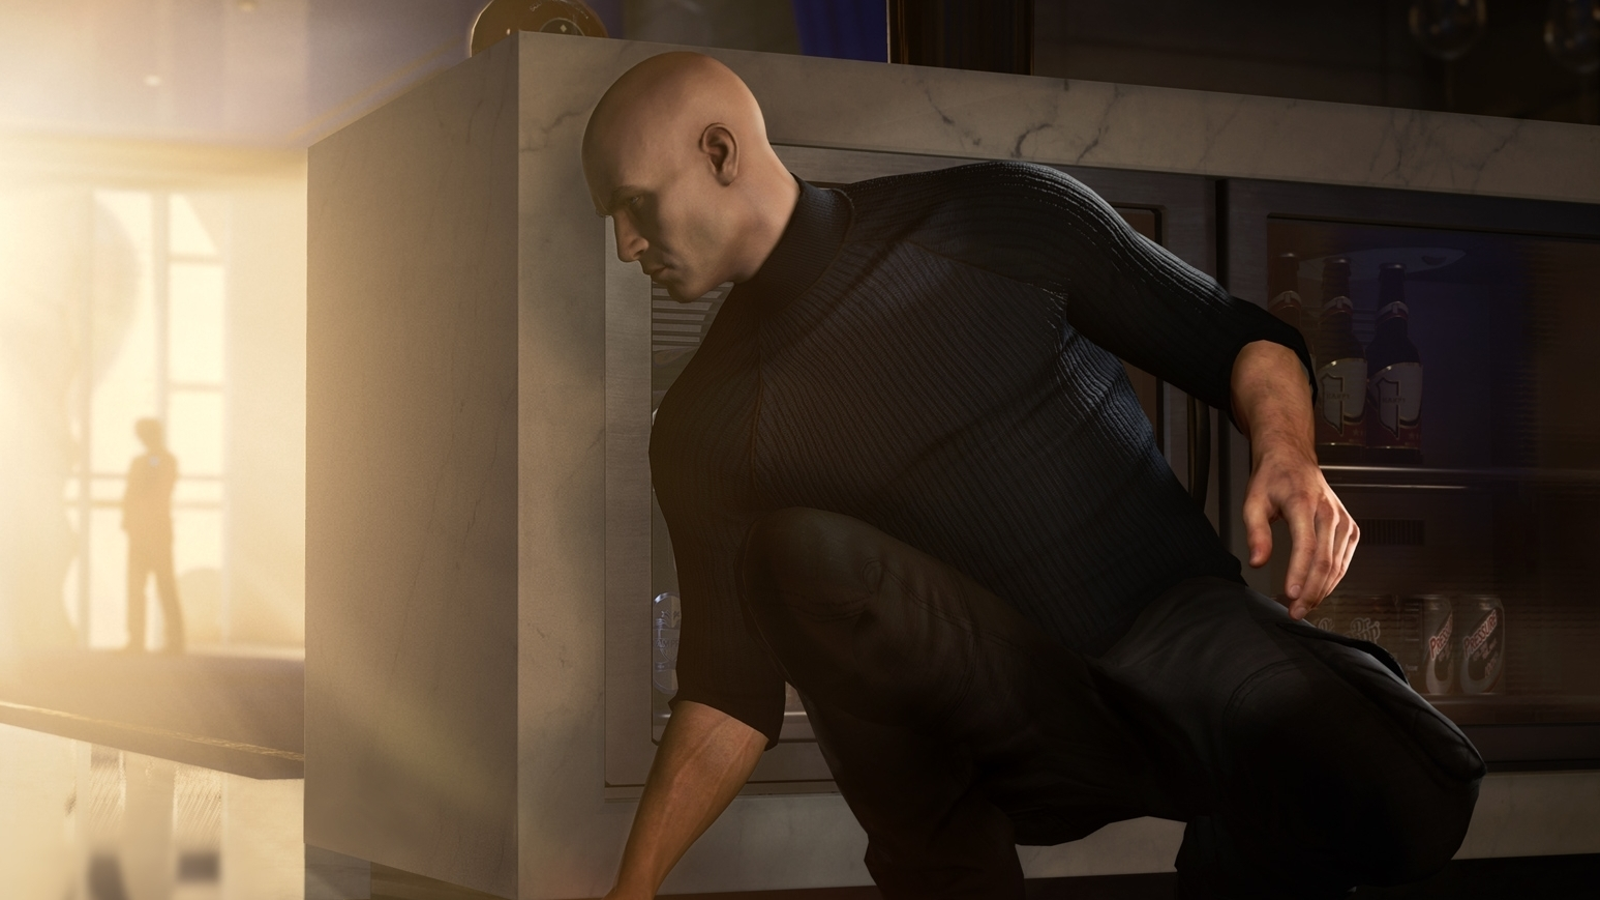 Hitman 3 FREE Starter Pack system requirements